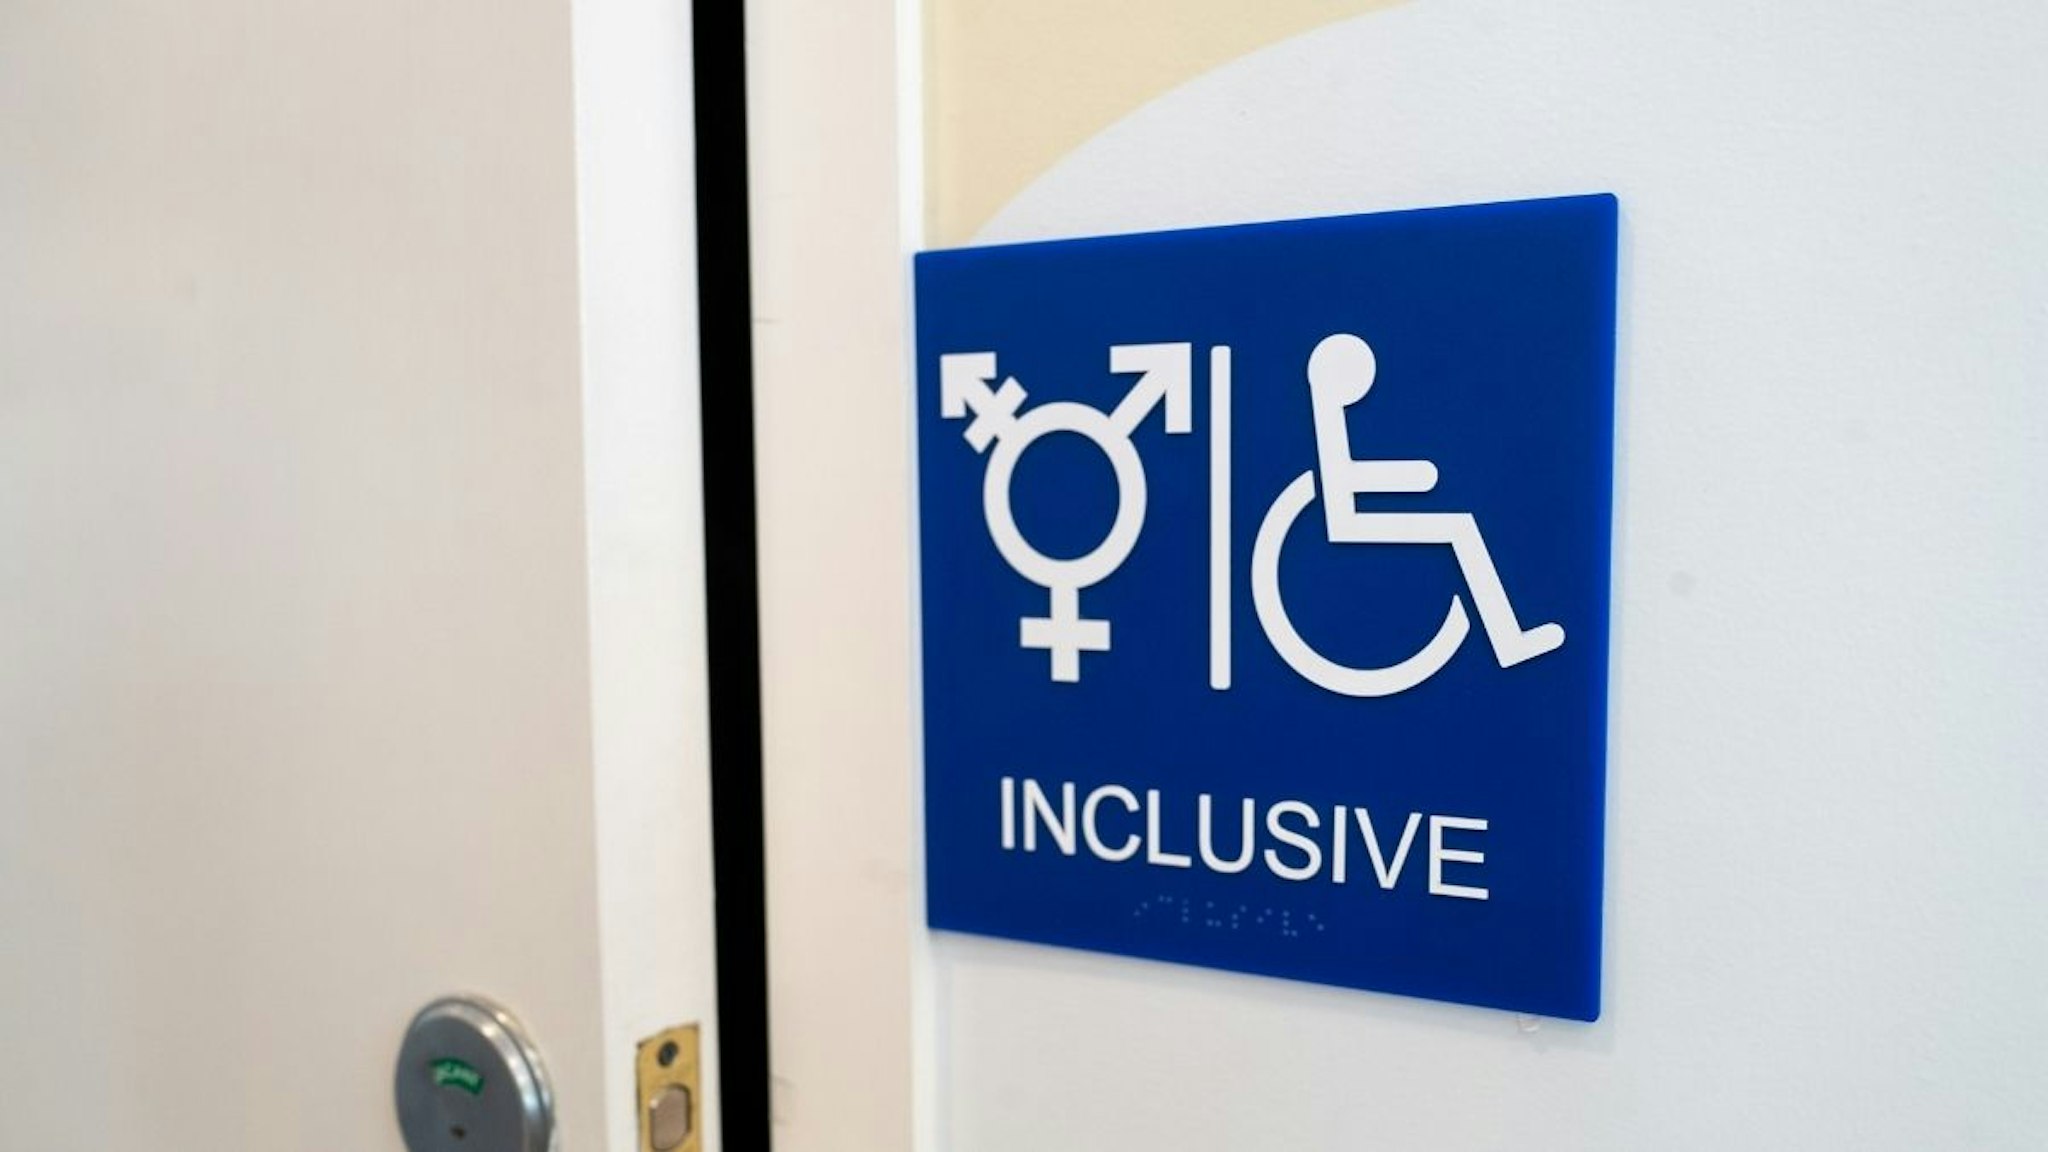 Sign for inclusive restroom, with symbol indicating male, female and transgender as well as handicapped symbol, part of LGBT rights initiatives in the Mission District neighborhood of San Francisco, California, July 18, 2019.